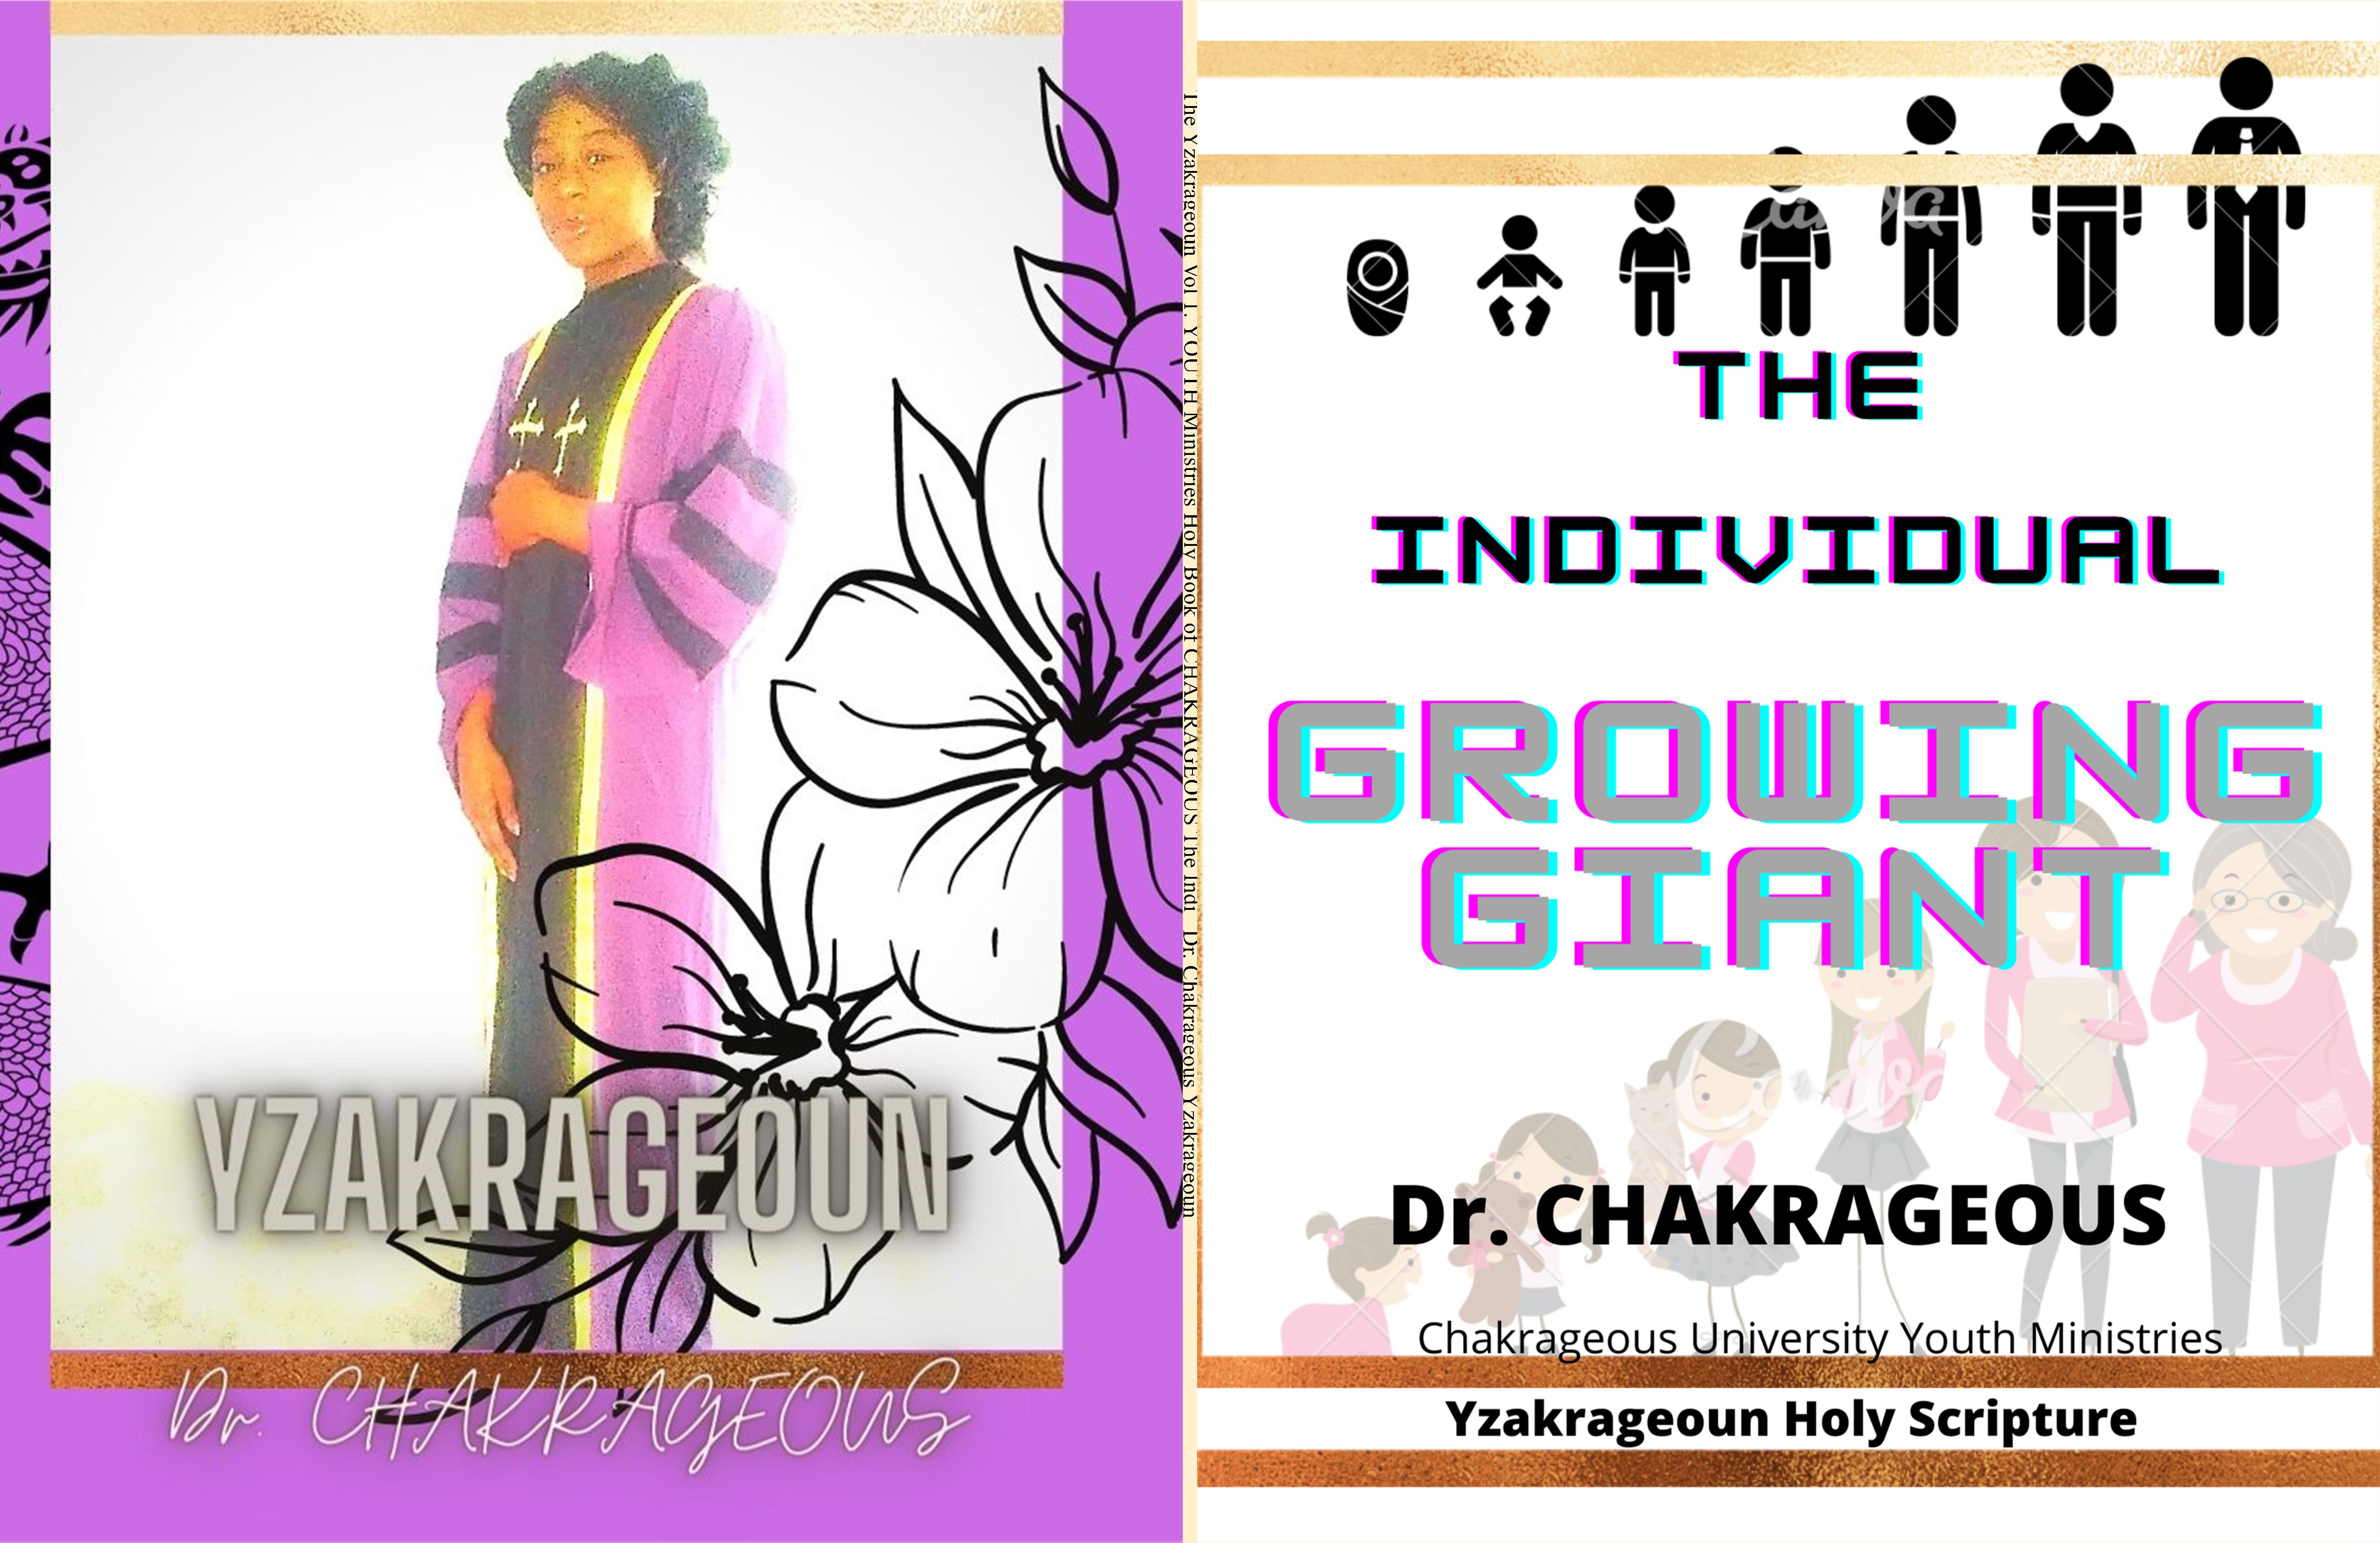 The Yzakrageoun Vol 1. YOUTH Ministries Holy Book of CHAKRAGEOUS The Individual Growing Giant cover image